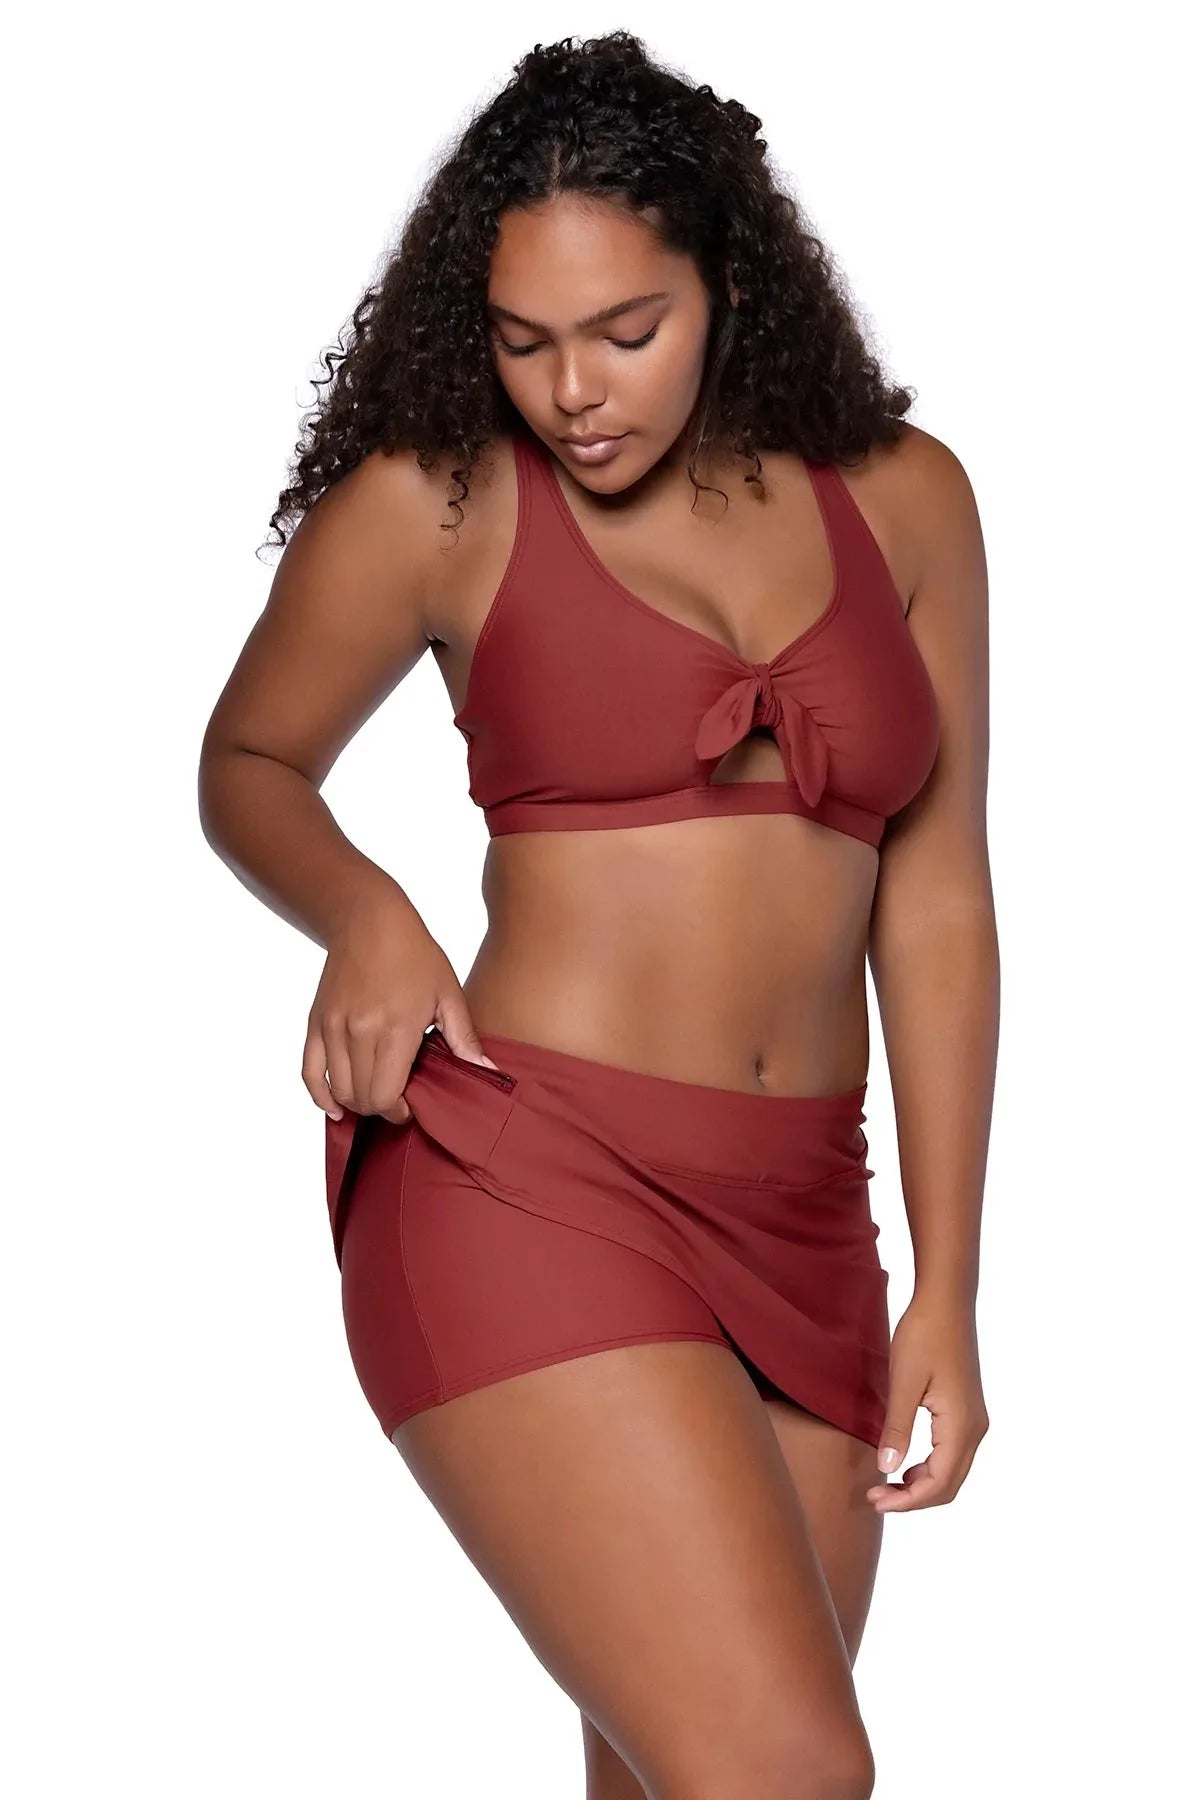 Sunsets Escape &quot;Brands,Swimwear&quot; Sunsets Tuscan Red Sporty Swim Skirt